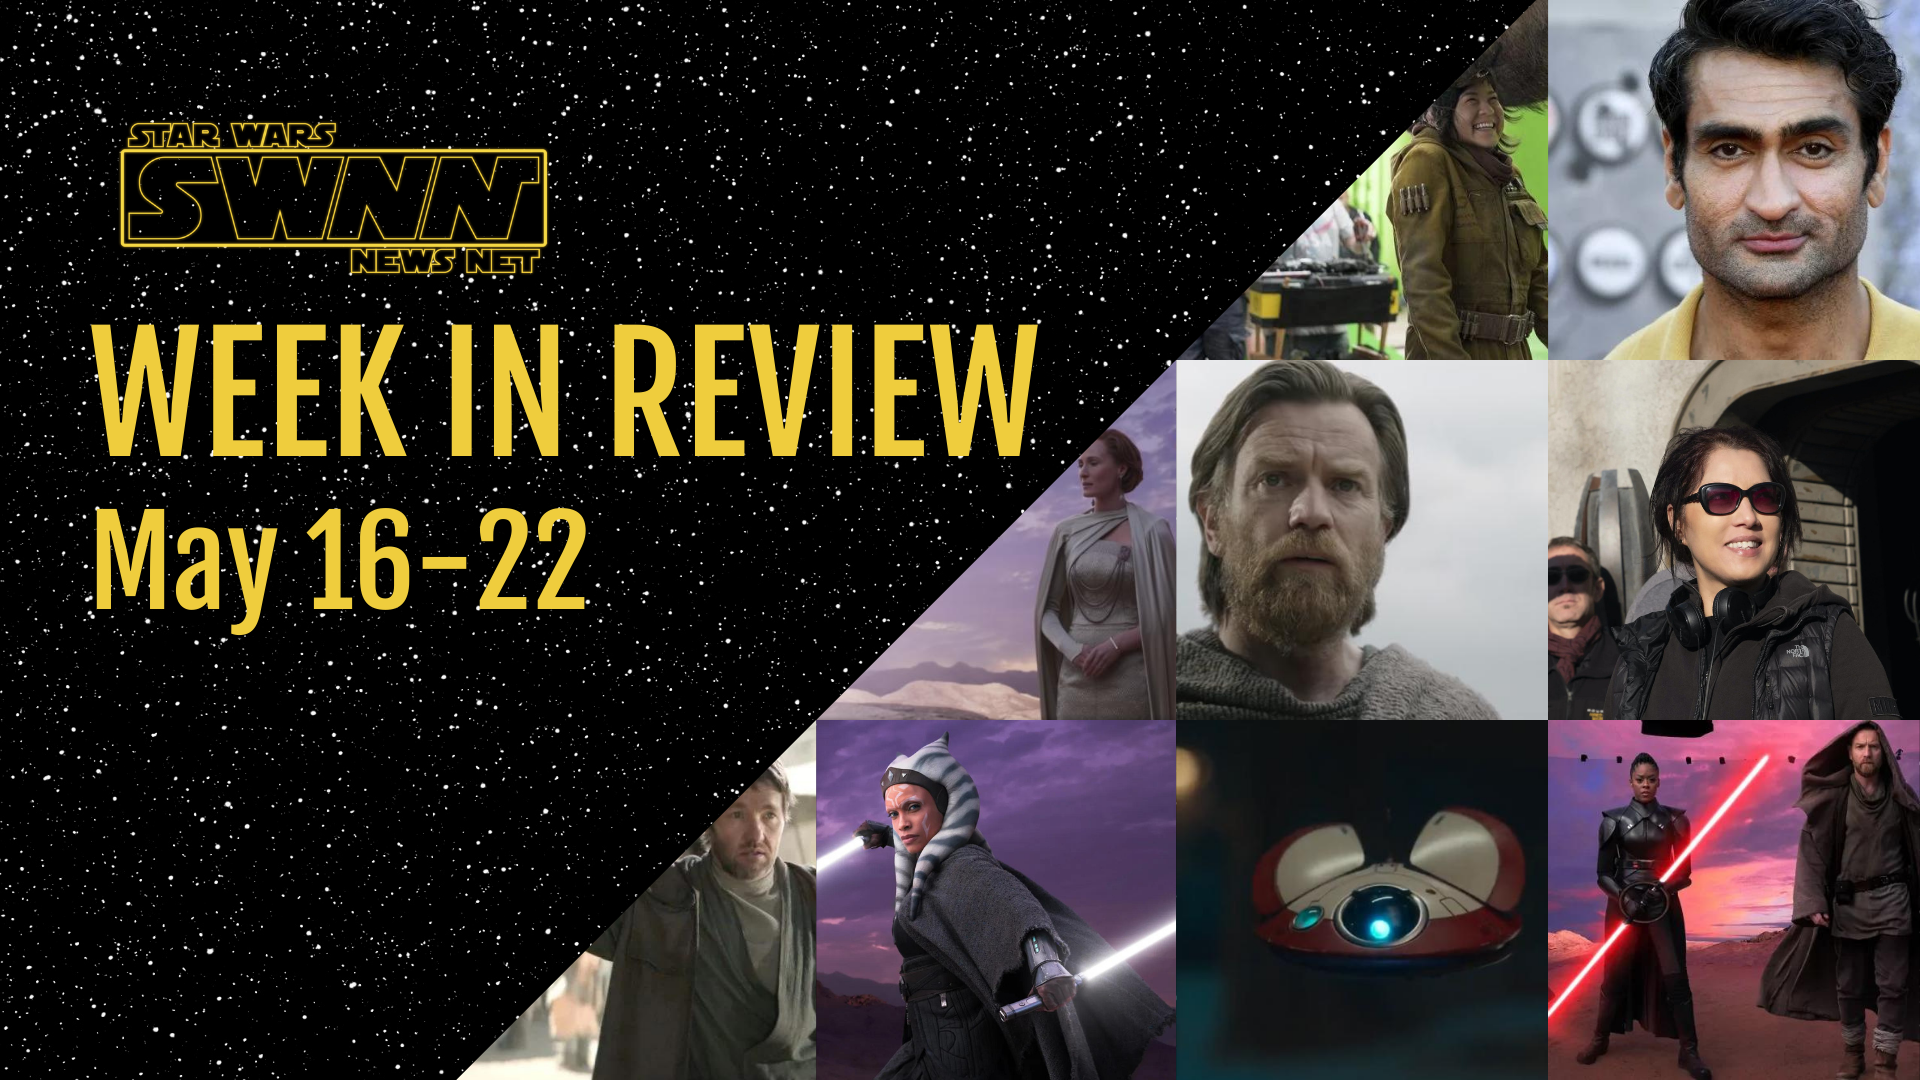 Star Wars Movies, TV, and Games News and Reviews